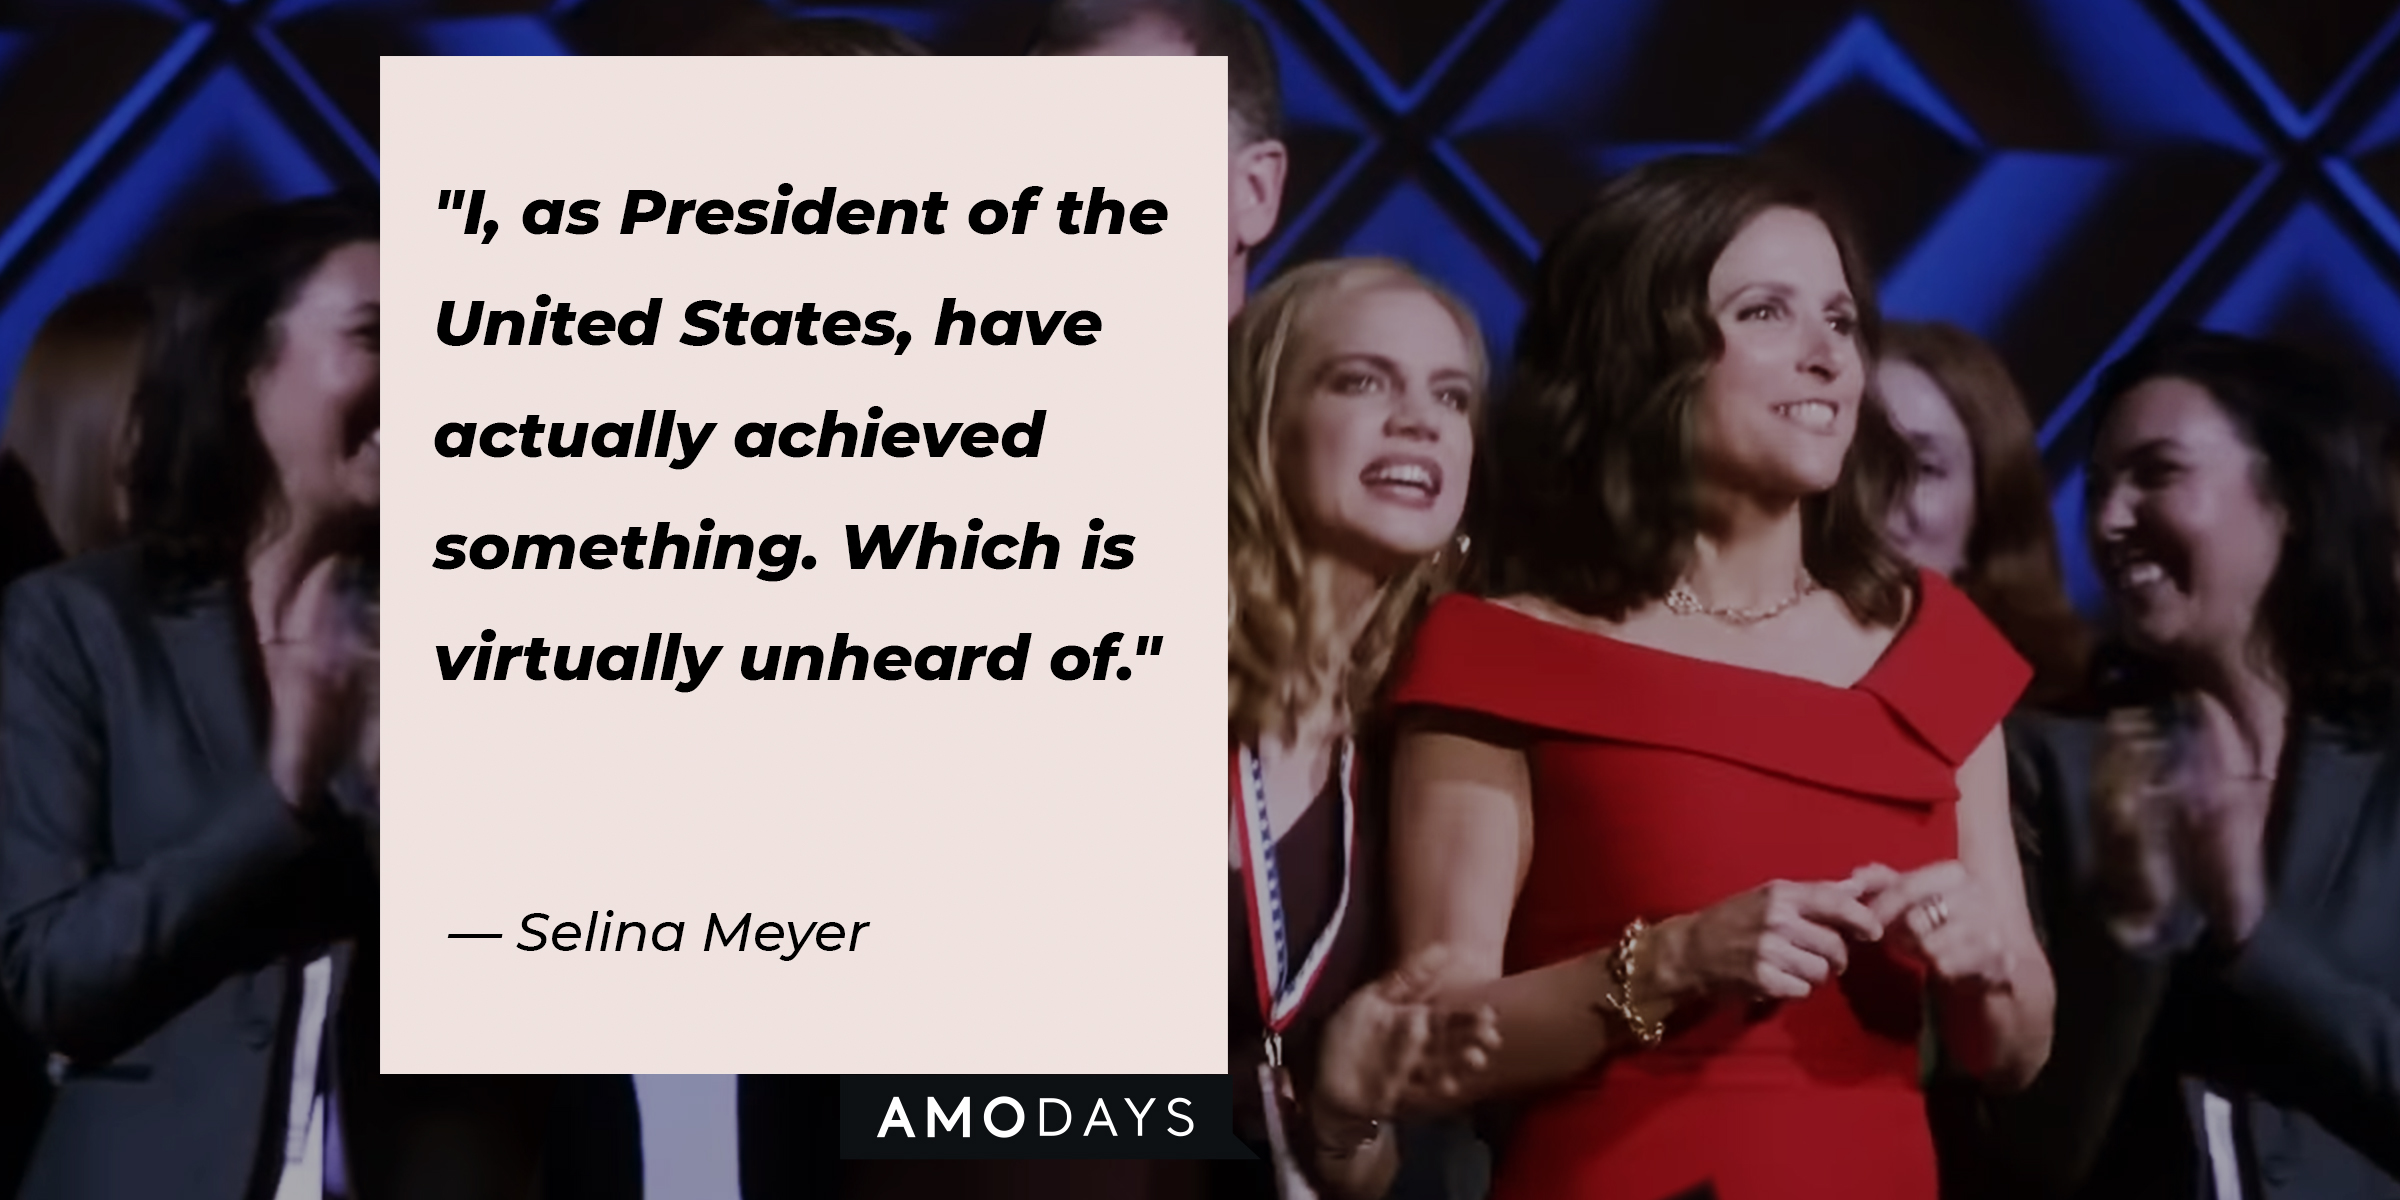 Selina Meyer, with other characters from “Veep” and her quote: "I, as President of the United States, have actually achieved something. Which is virtually unheard of." │Source: youtube.com / Max